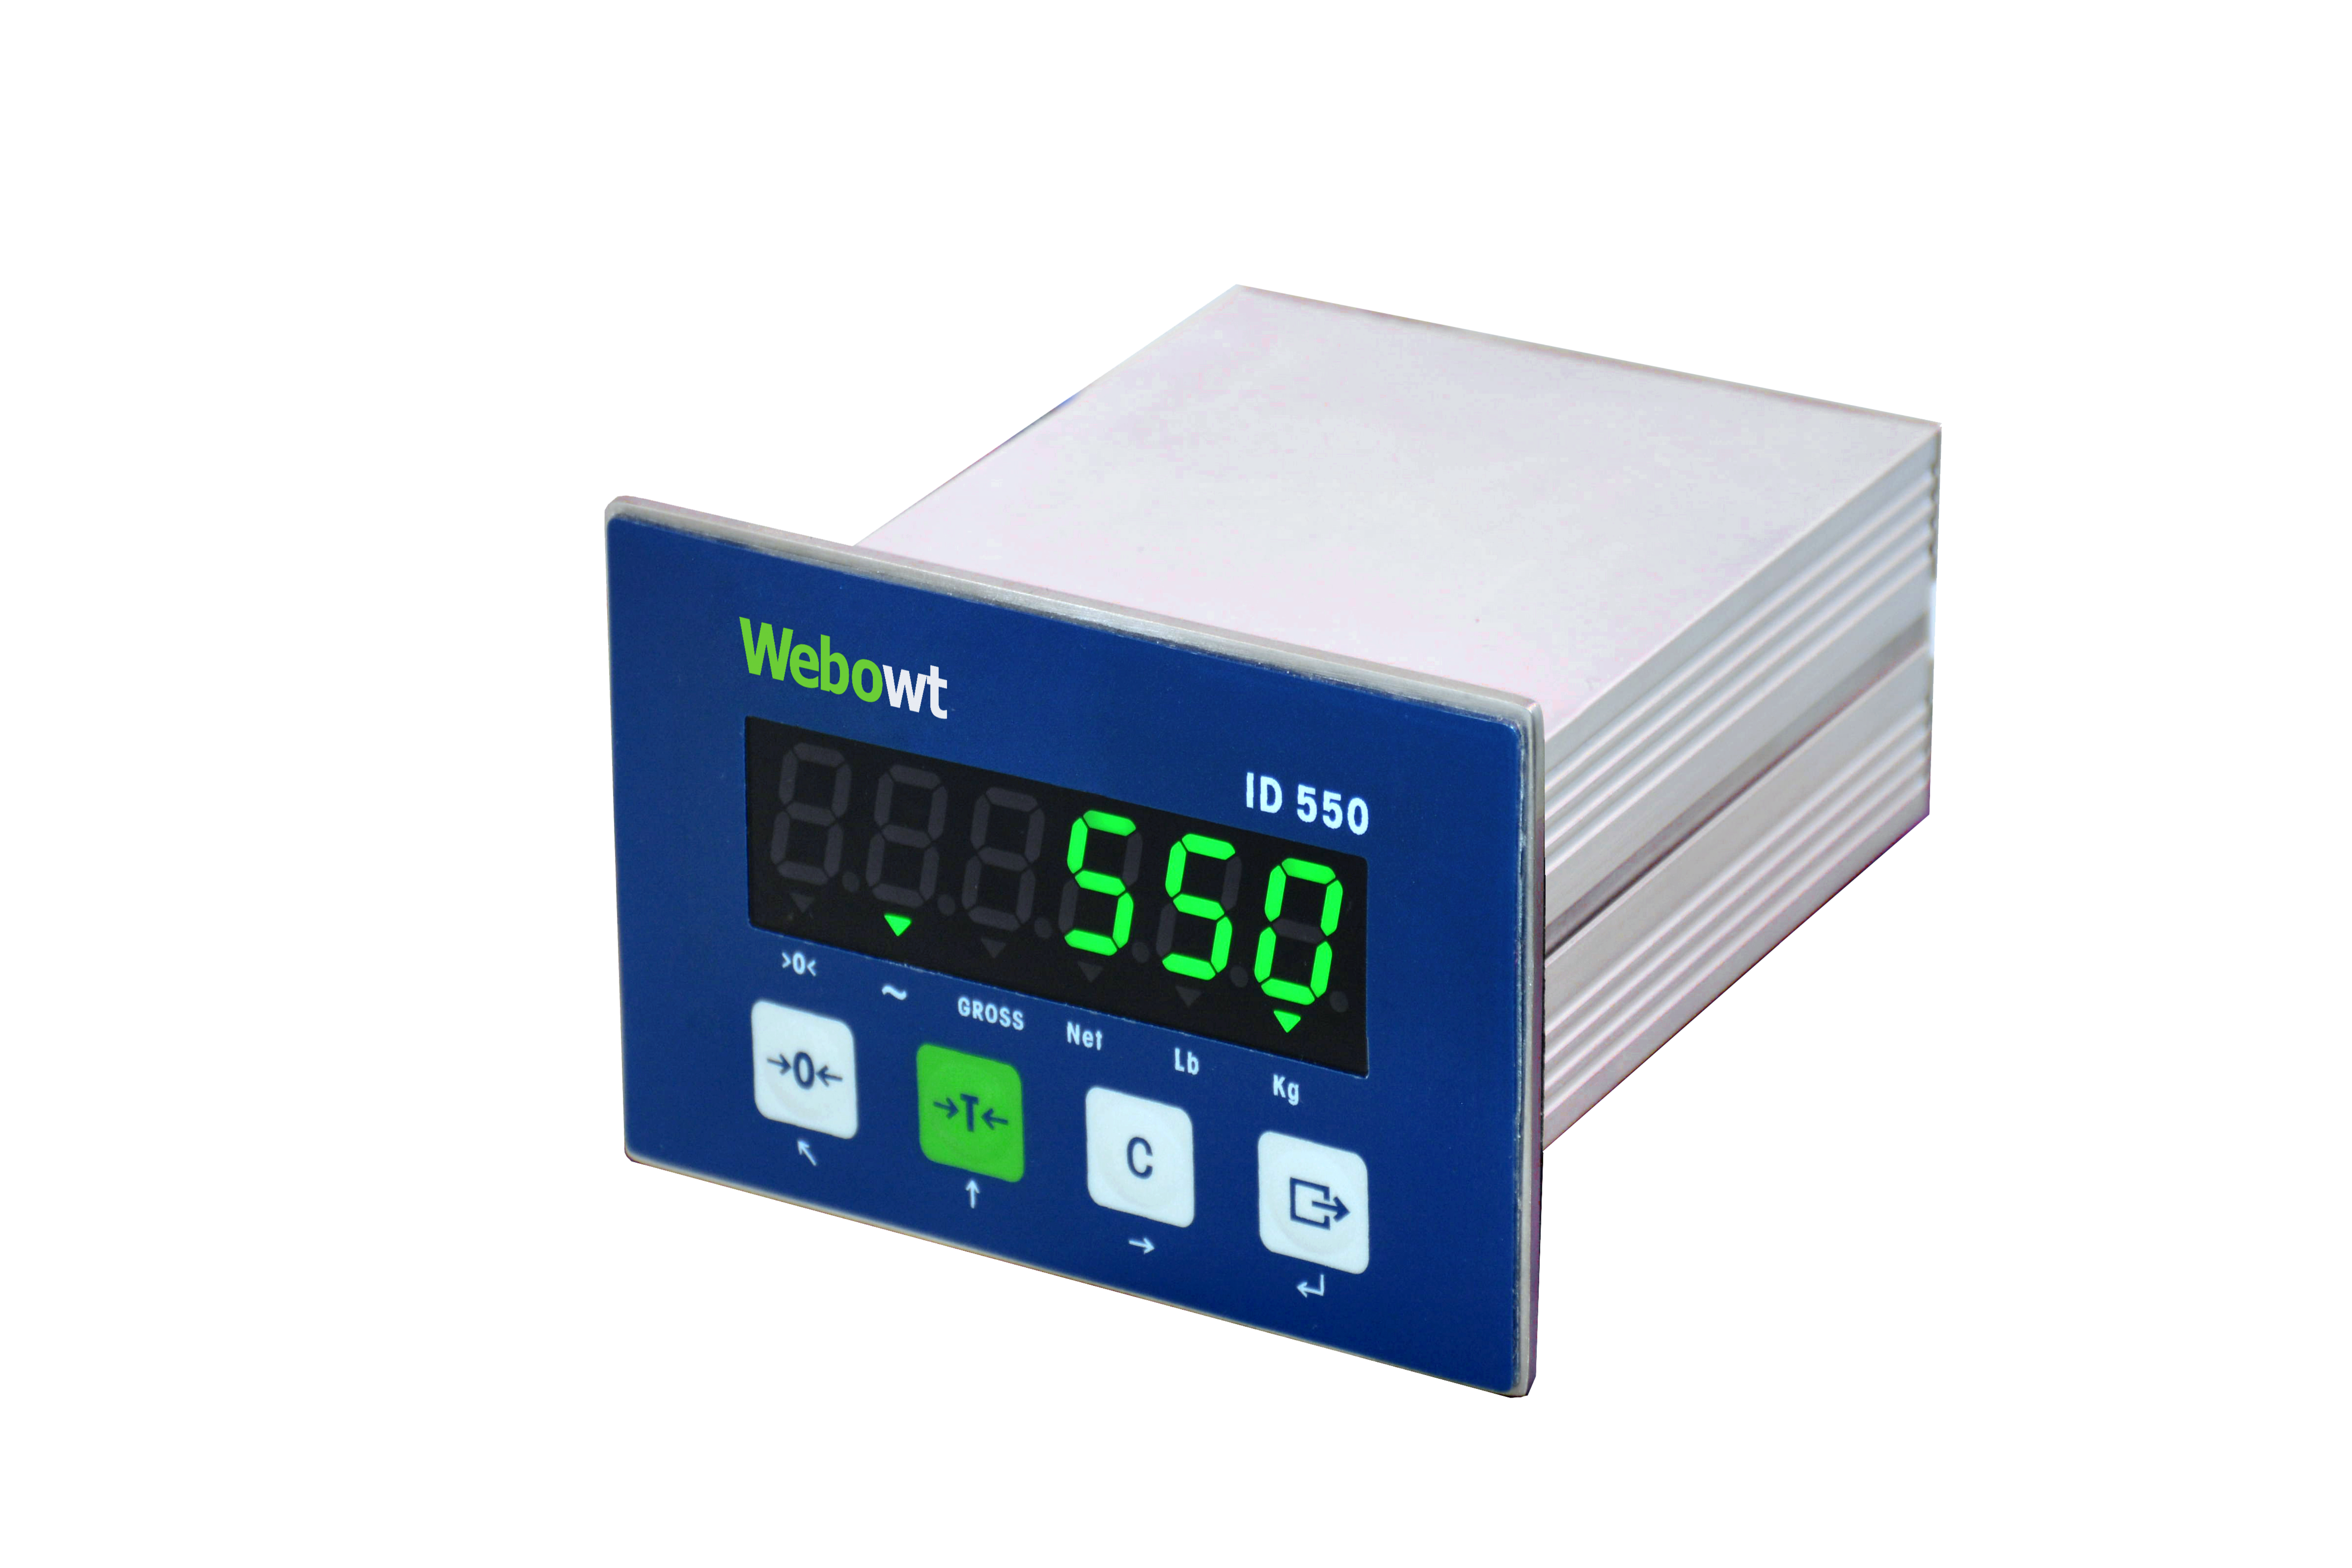 Order No. 8550003, Model No.:ID550P00A00D, ID550, Panel, Green LED, 1 Serial port(RS232/485), MODBUS-RTU, 4-20mA Output(16-digit DAC), Universal constant controll software, 24VDC